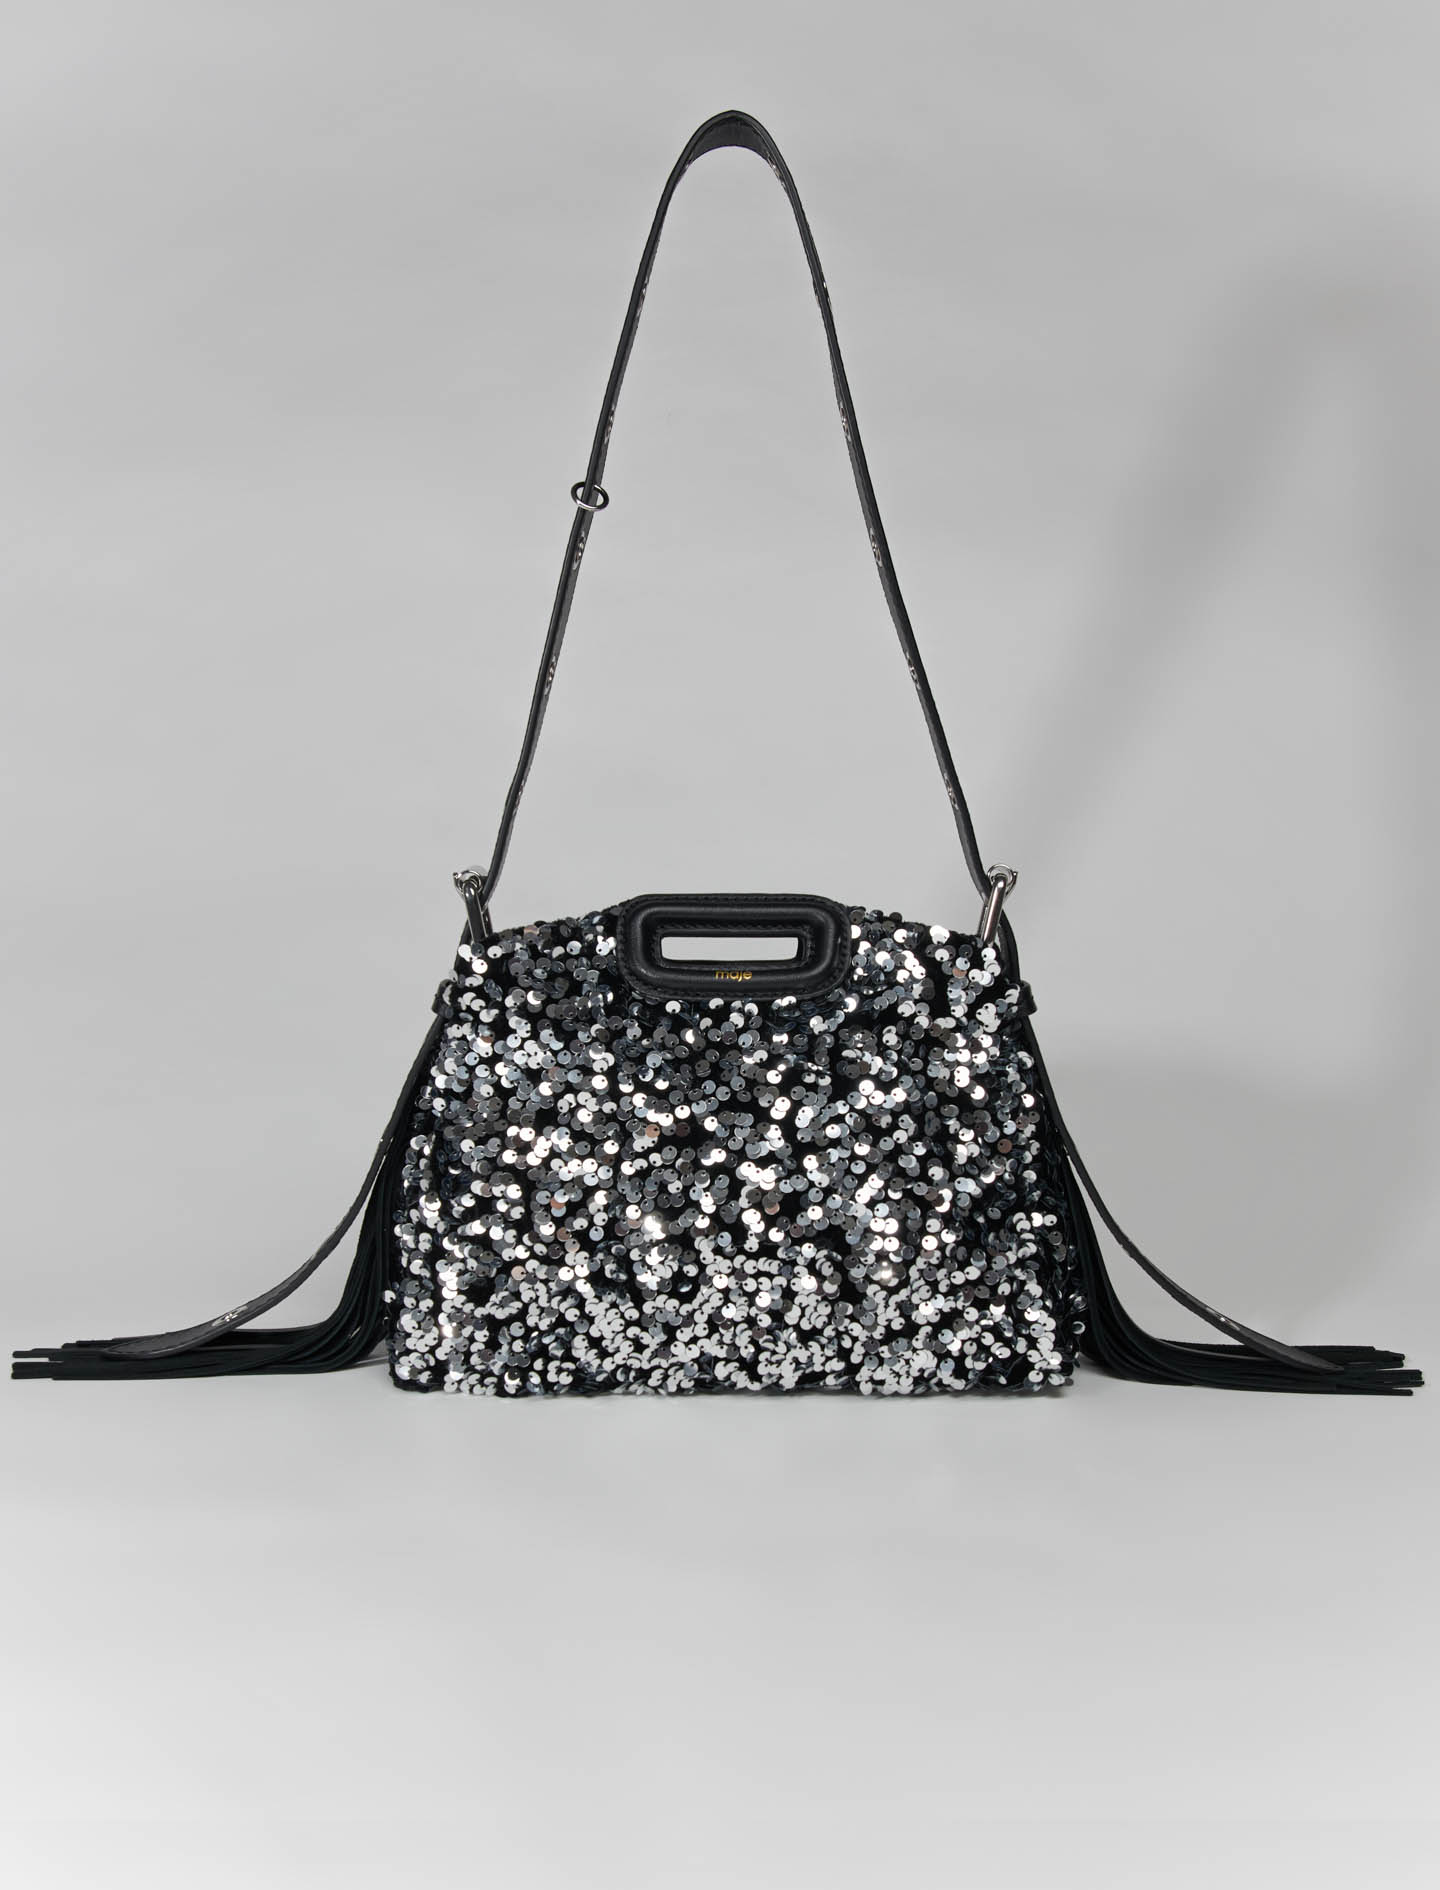 Maje Woman's polyester, Sequin mini Miss M bag for Fall/Winter, in color Black / Black